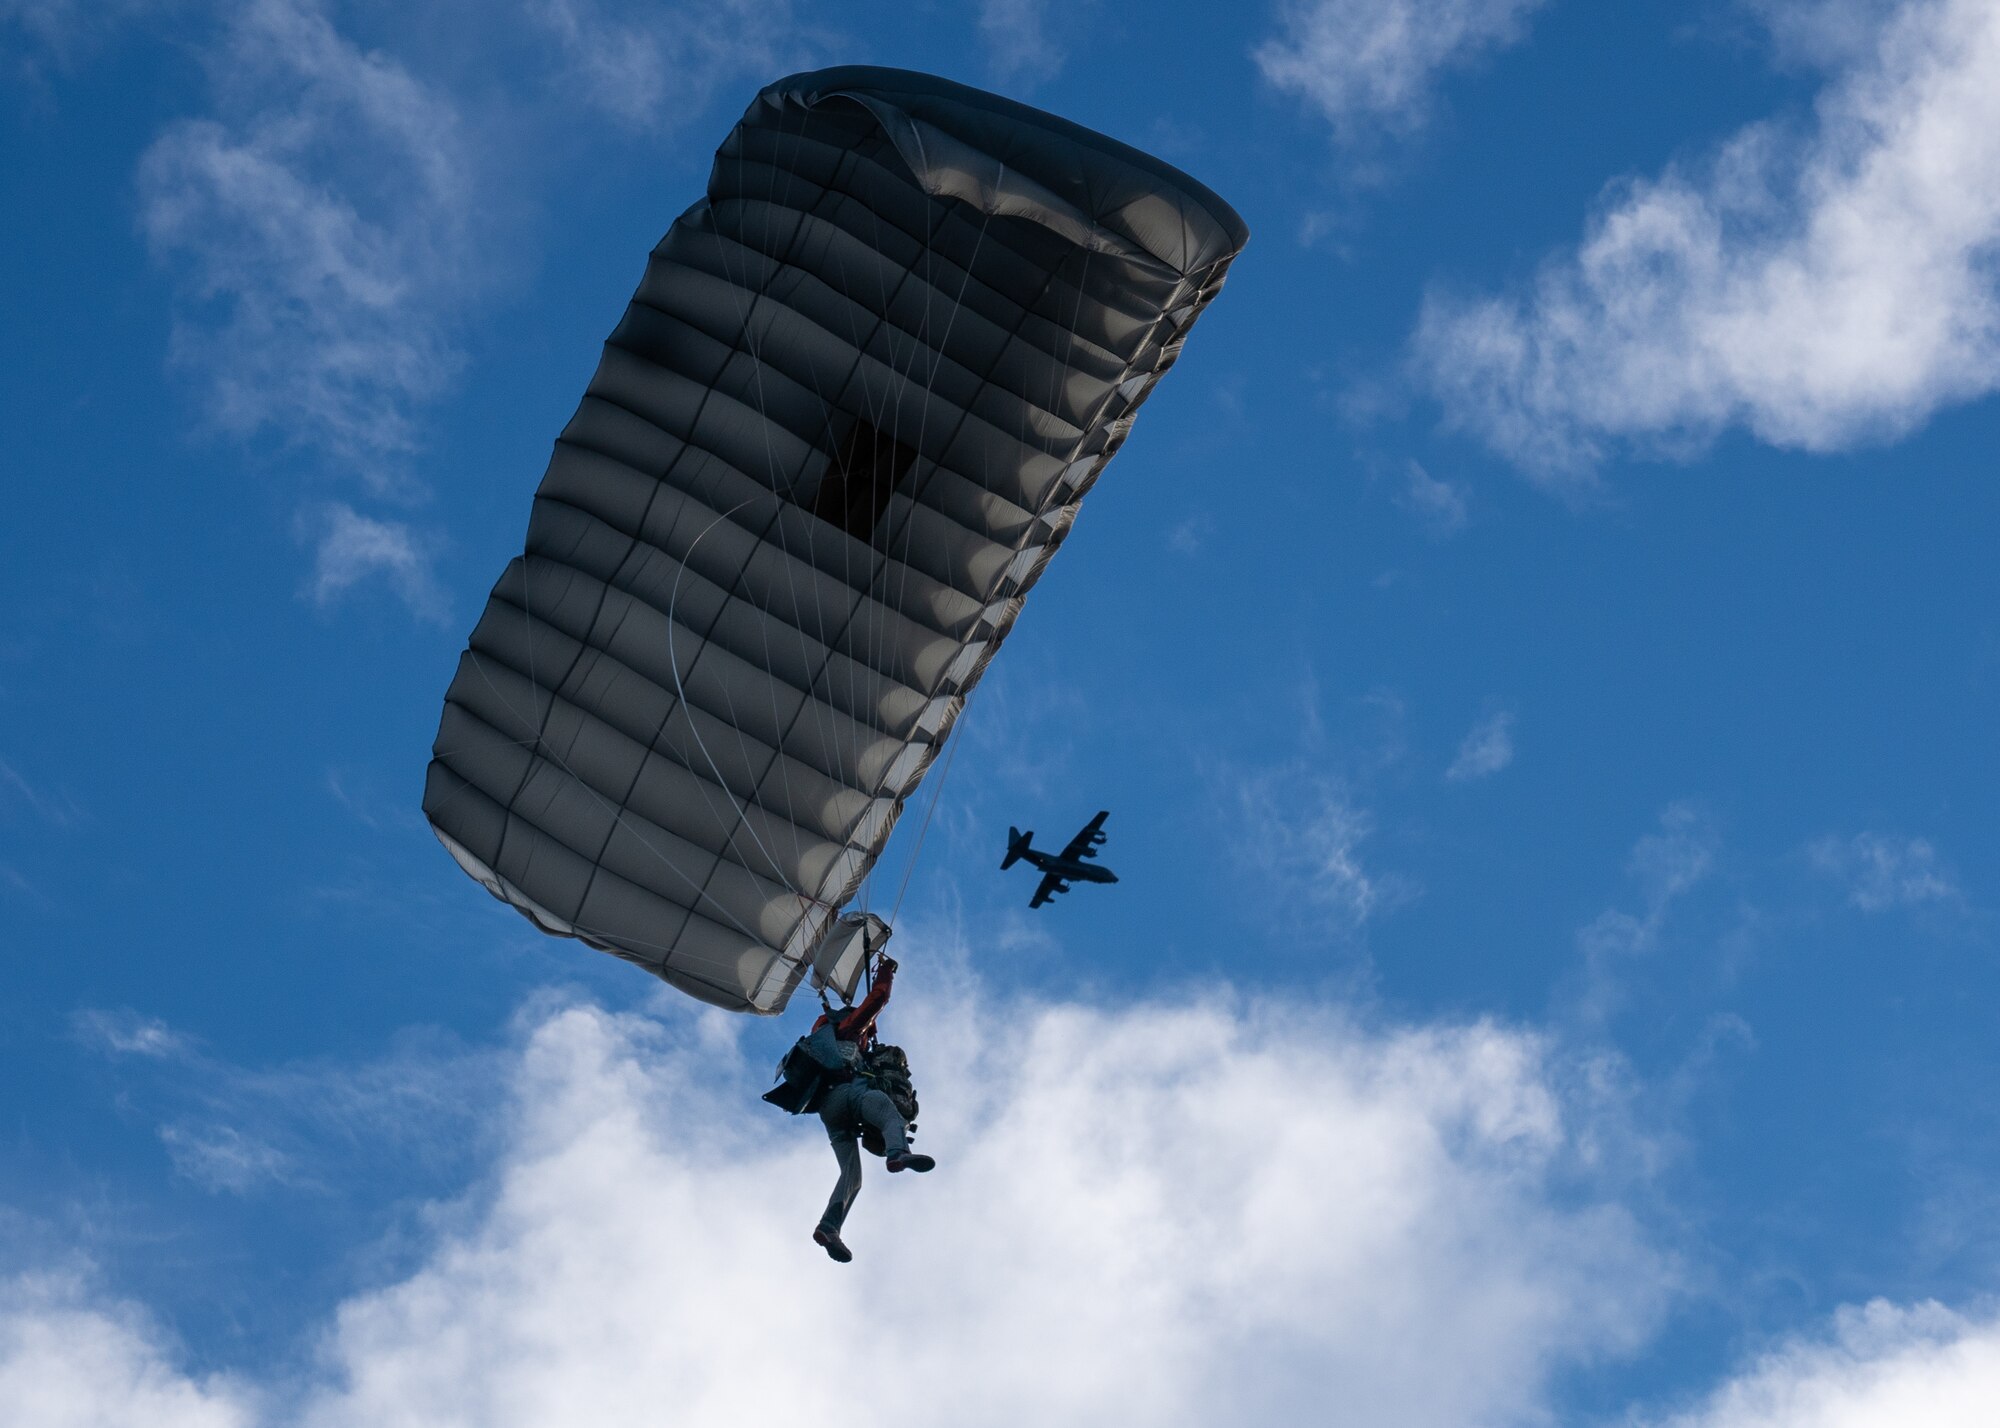 U.S. Air Force Tech. Sgt. Tyler Albee, a pararescueman assigned to the 212th Rescue Squadron, Alaska Air National Guard, glides beneath an Alaska Air National Guard HC-130J Combat King II operated by an aircrew from the 211th Rescue Squadron during a training event at Joint Base Elmendorf-Richardson.